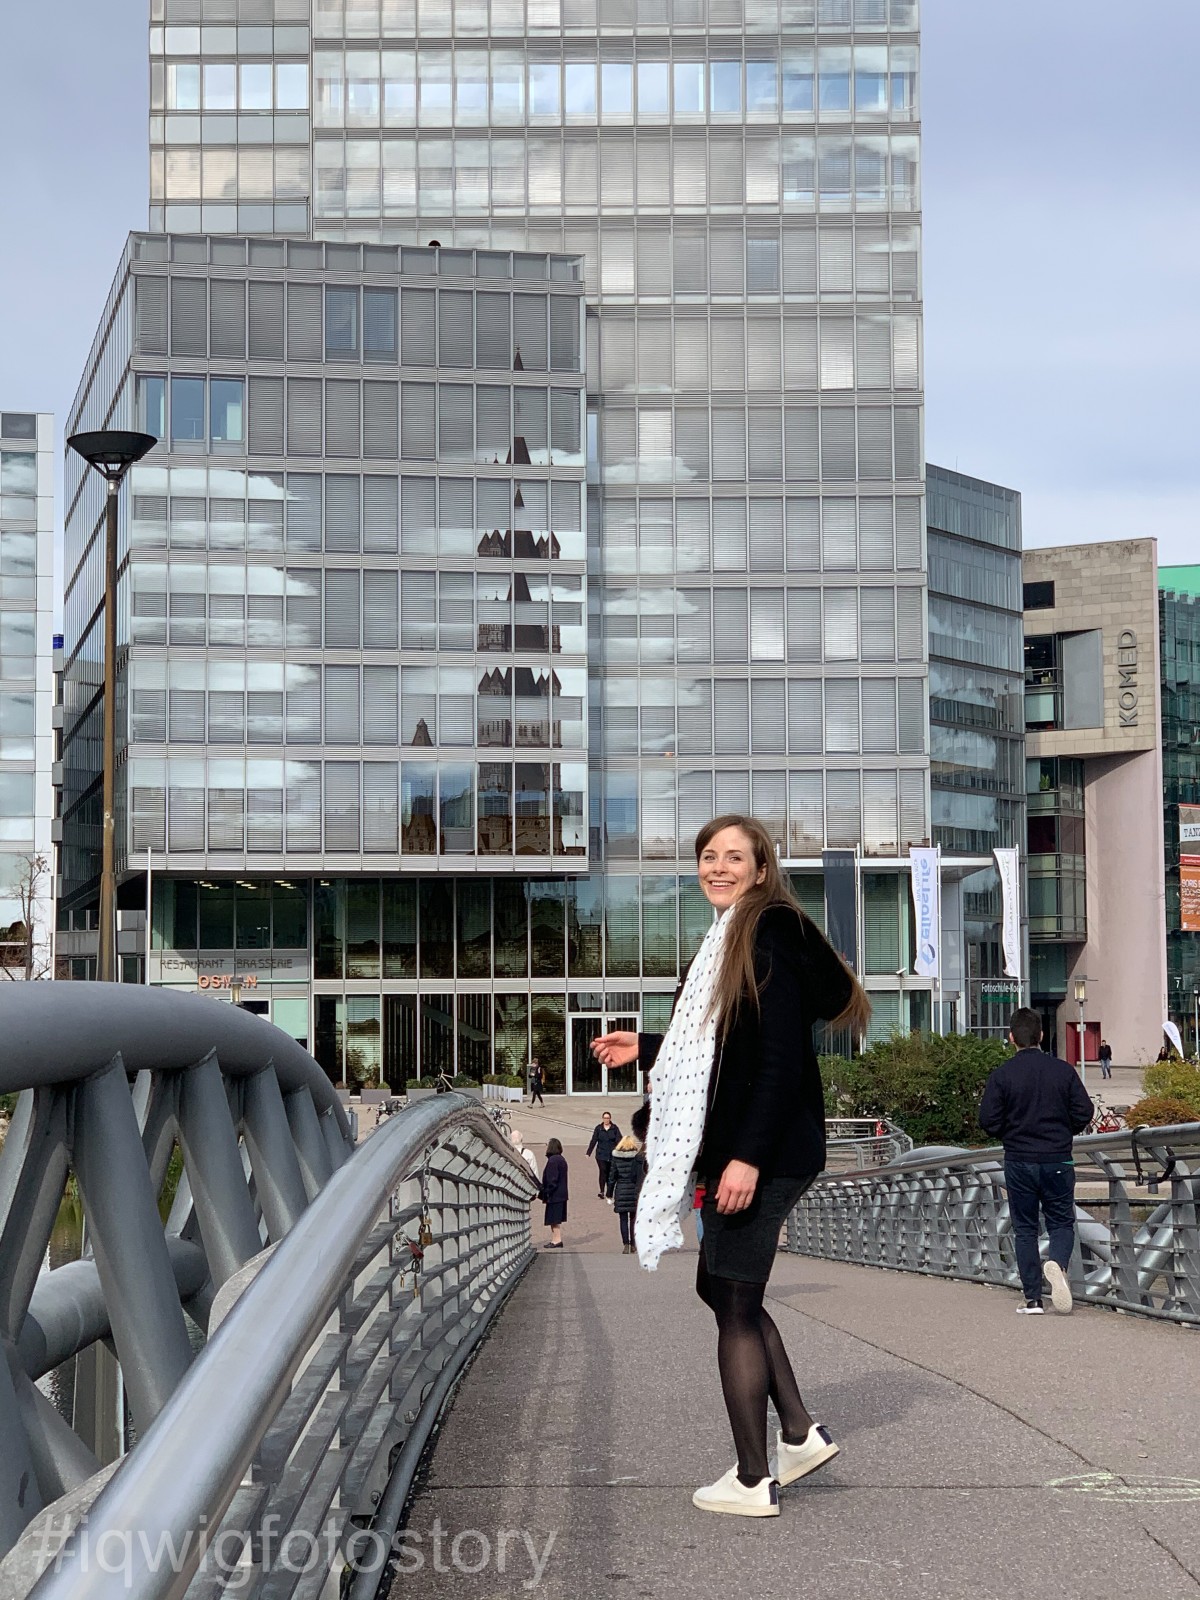 IQWiG staff member Vanessa is standing on a bridge, smiling into the camera. In the background is a high-rise building with a glass facade.